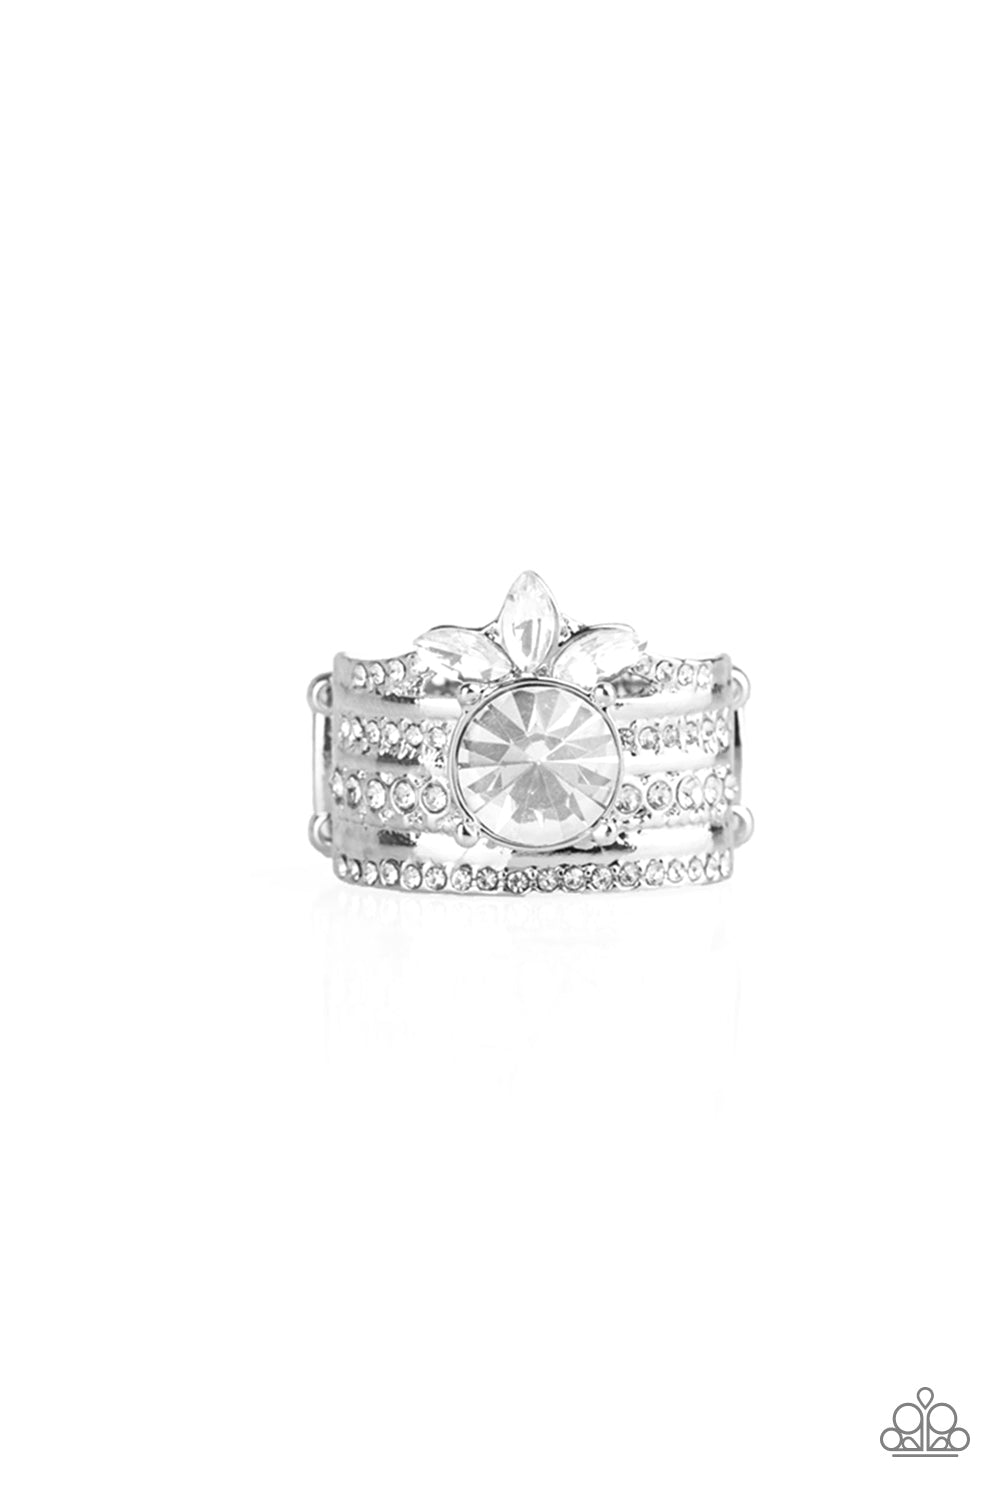 Varying in size, rows of dainty white rhinestones are encrusted along a thick silver band. Round and marquise rhinestones are pressed into the band, creating a refined centerpiece. Features a stretchy band for a flexible fit.